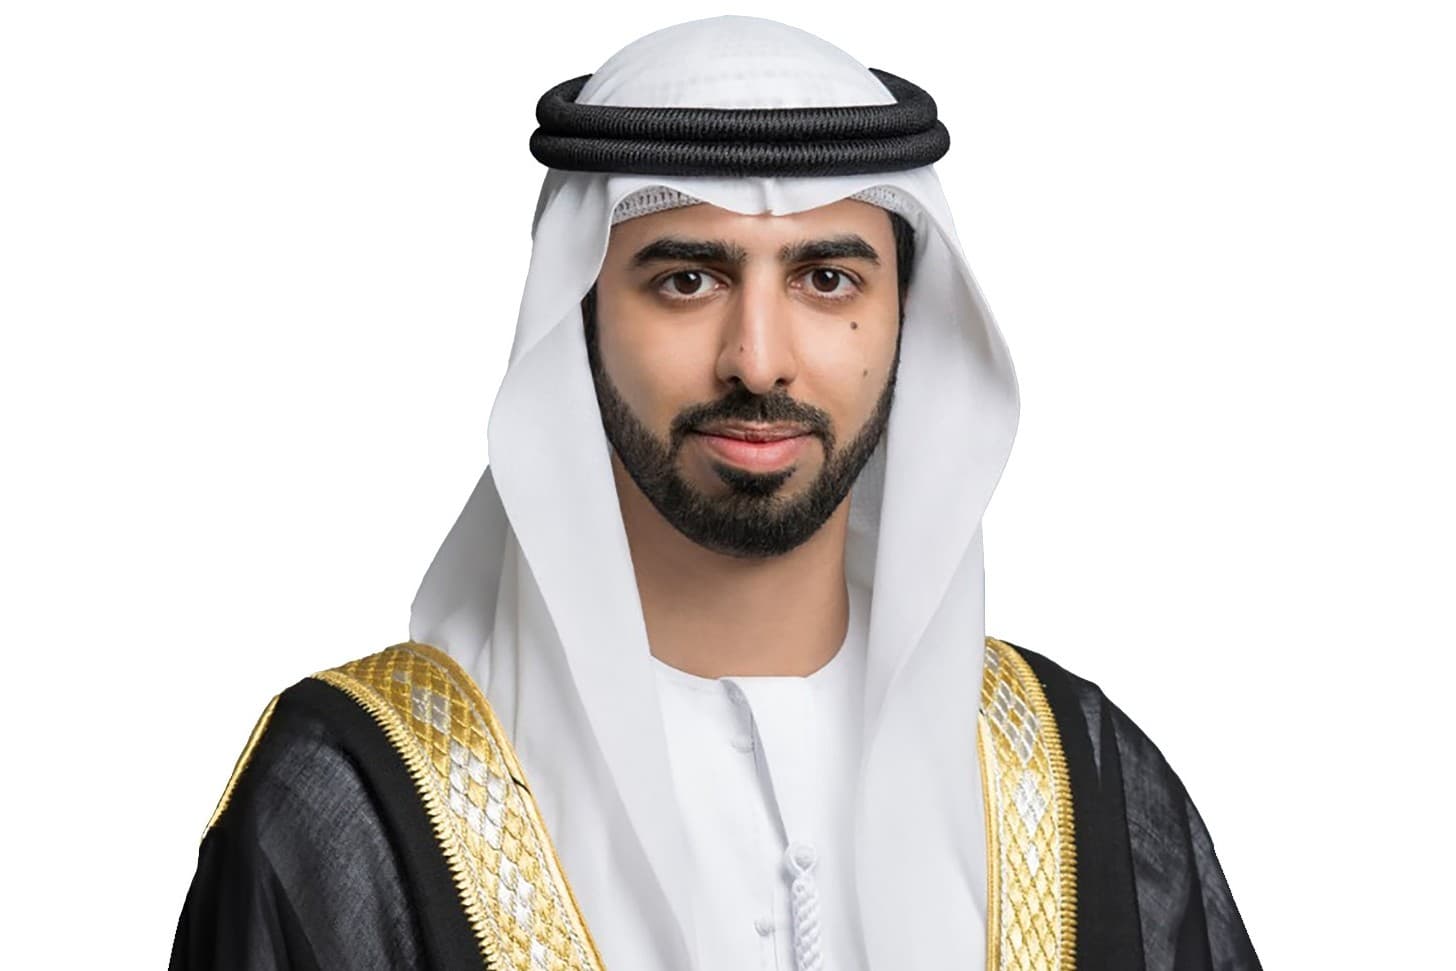 H.E. Omar Sultan Al Olama, Minister of State for Artificial Intelligence, Digital Economy and Remote Work Applications and Chairman of Dubai Chamber of Digital Economy